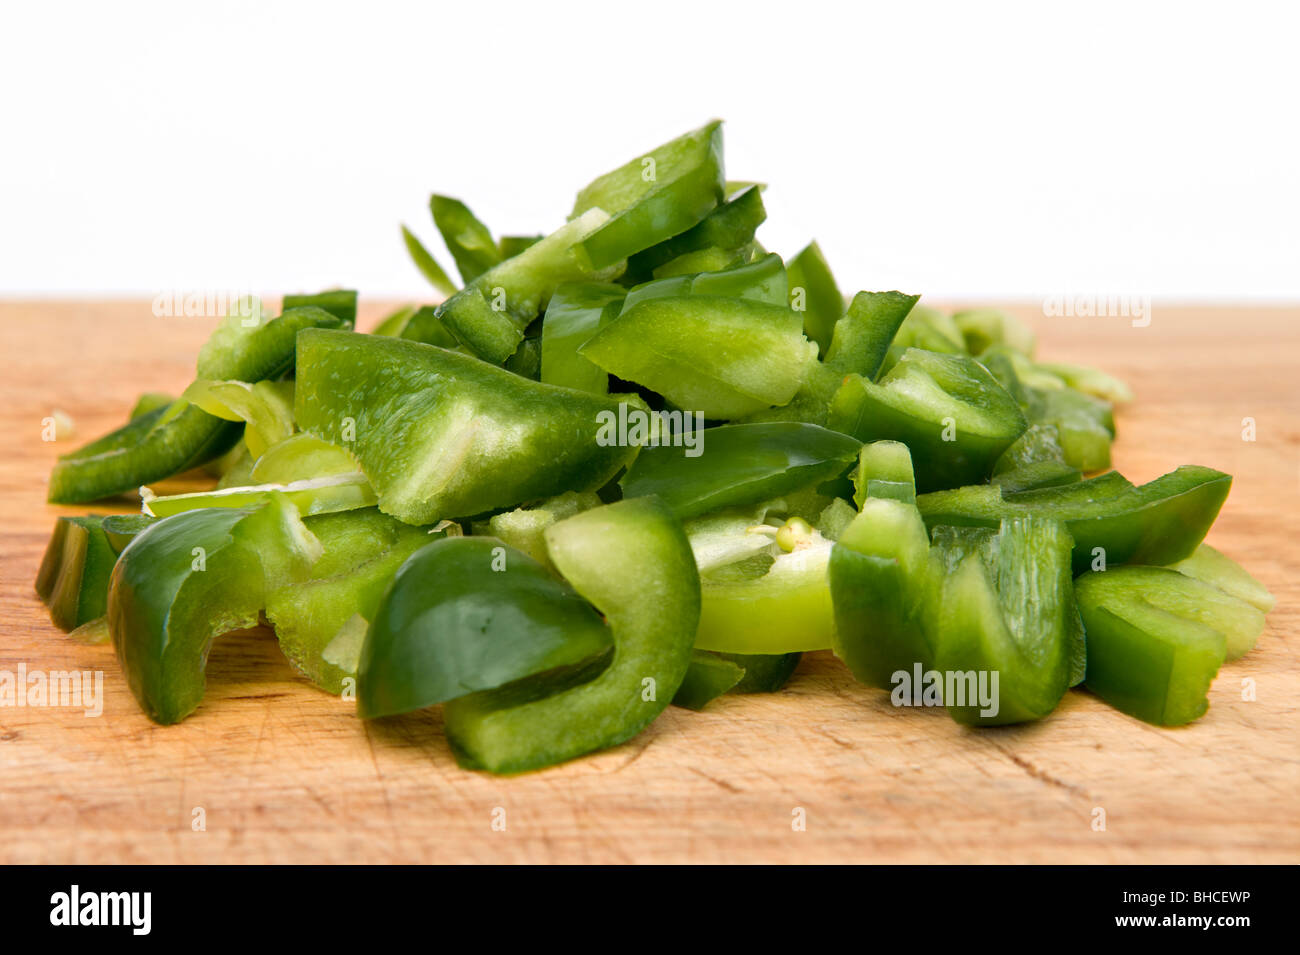 Close up of chopped green peppers on wooden chopping board against a white background Stock Photo